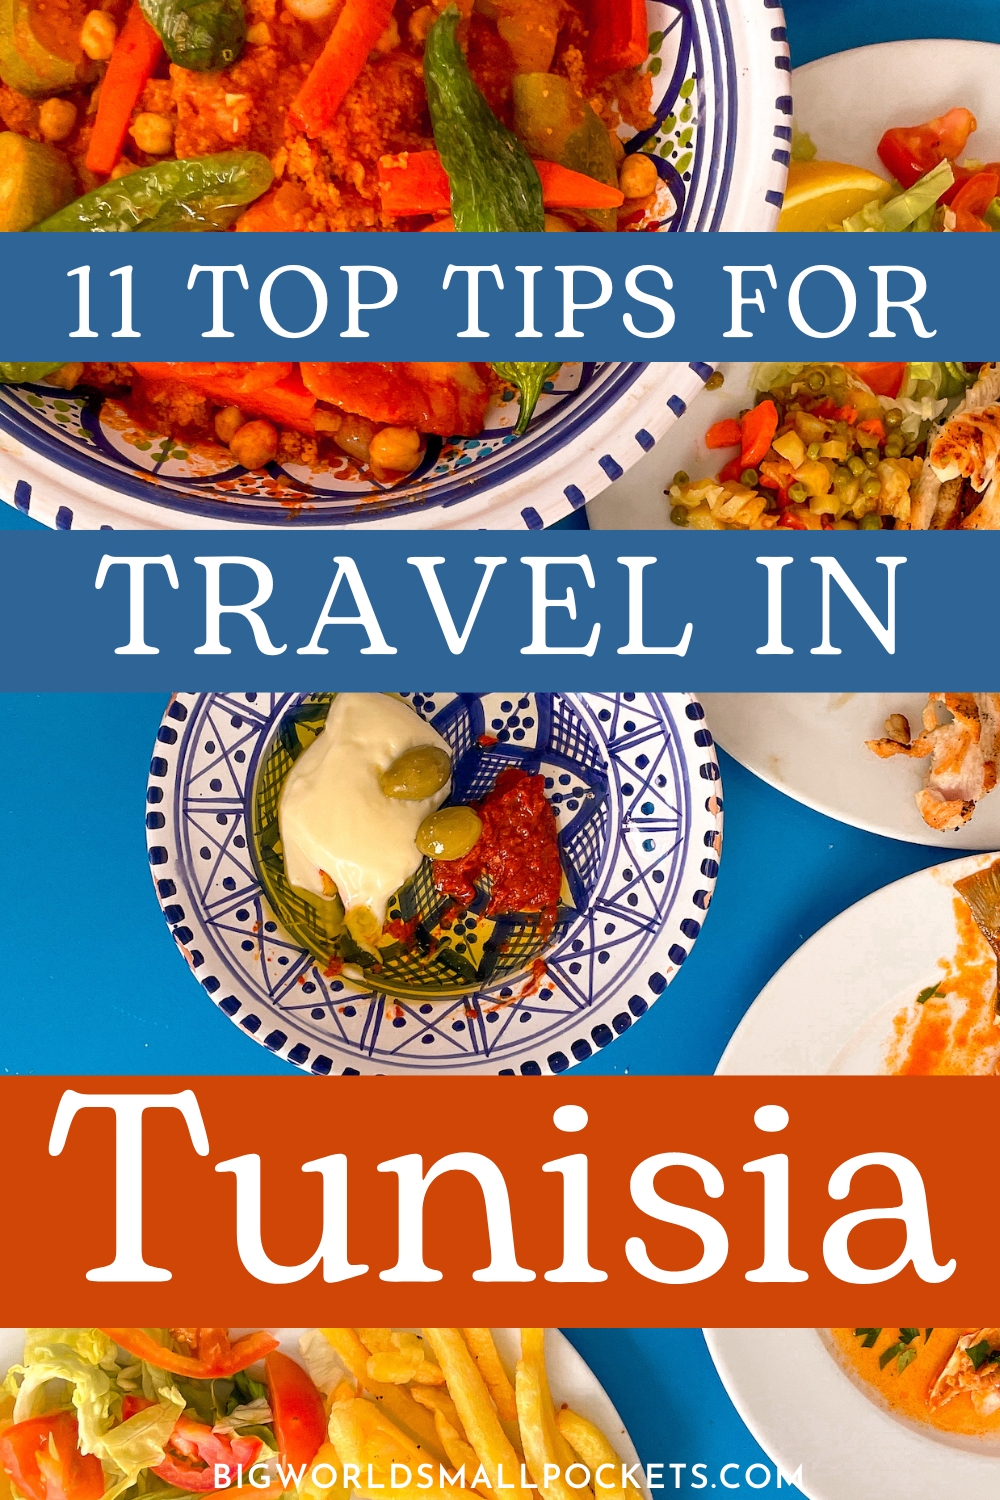 11 Top Tips For Travel in Tunisia